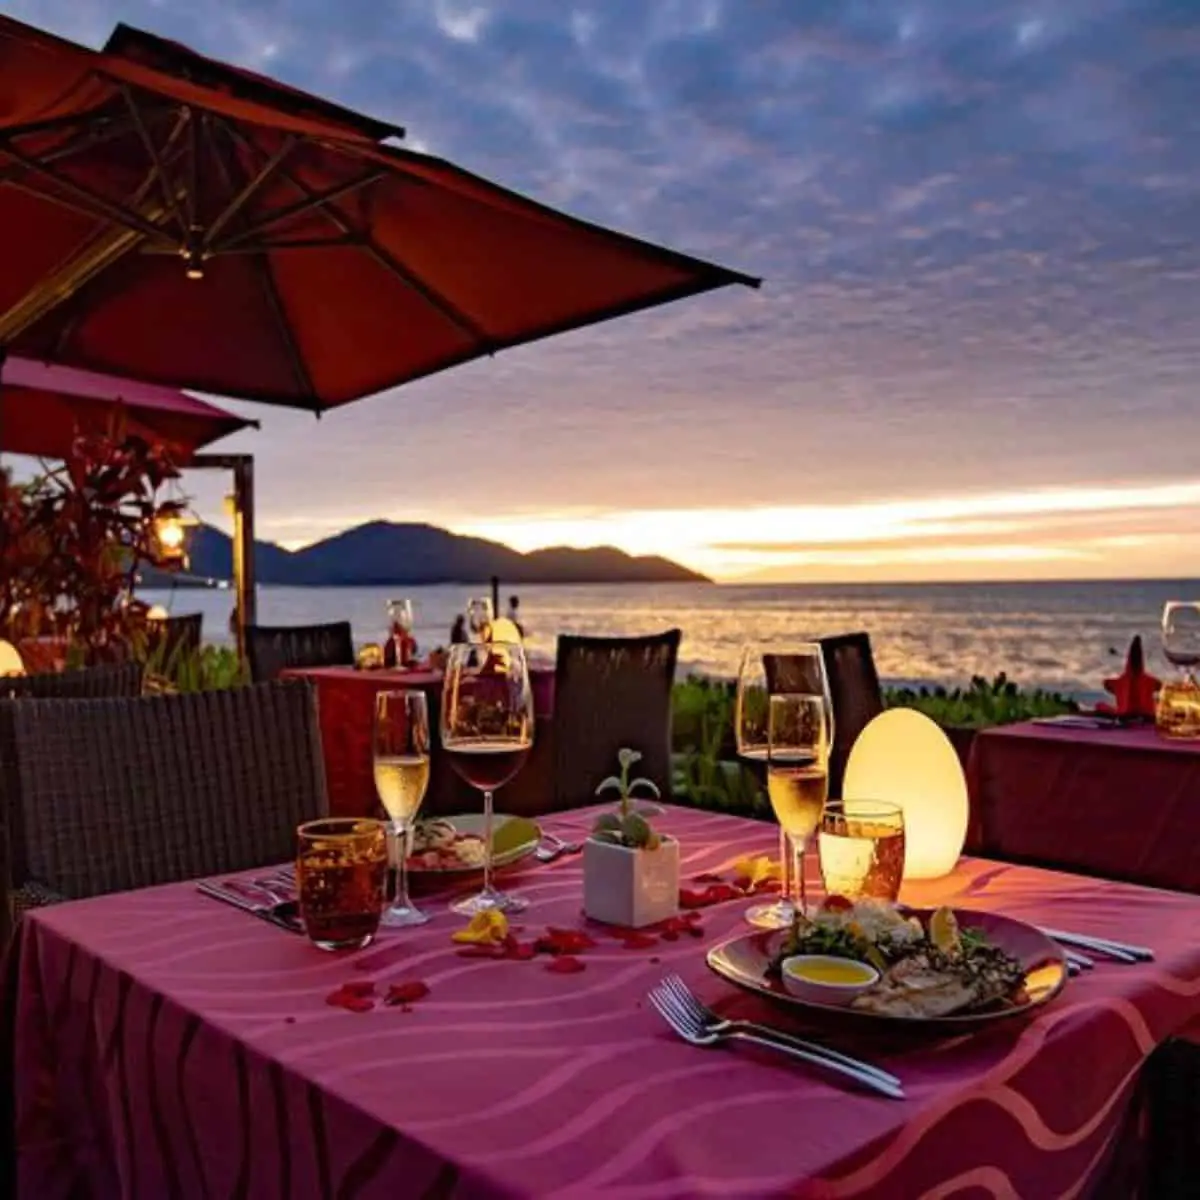 Park Royal Penang Resort’s romantic dining with sunset setting and magenta themed dining seats